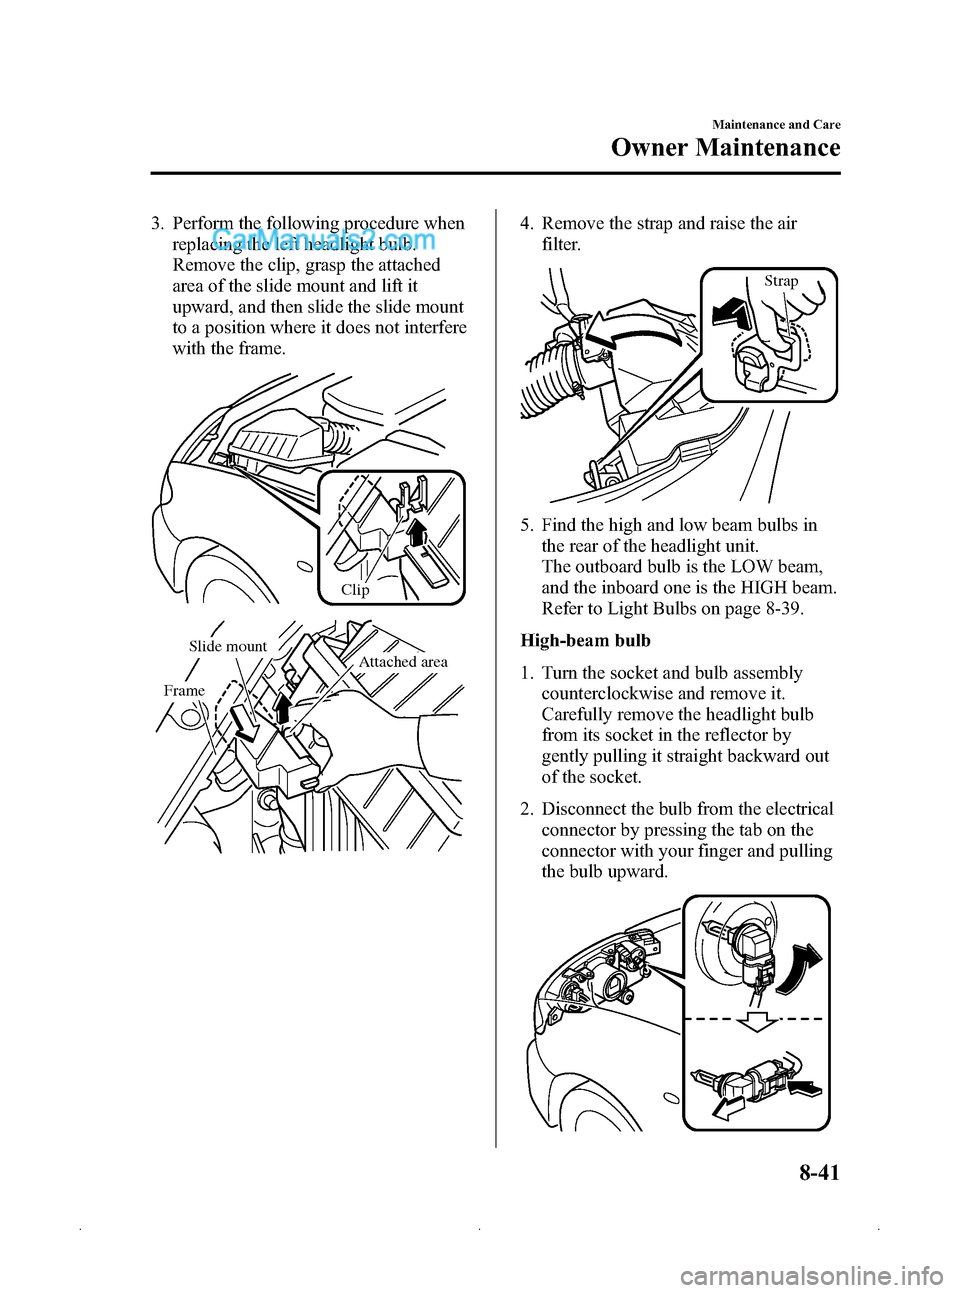 MAZDA MODEL MAZDASPEED 3 2009  Owners Manual (in English) Black plate (327,1)
3. Perform the following procedure whenreplacing the left headlight bulb.
Remove the clip, grasp the attached
area of the slide mount and lift it
upward, and then slide the slide m